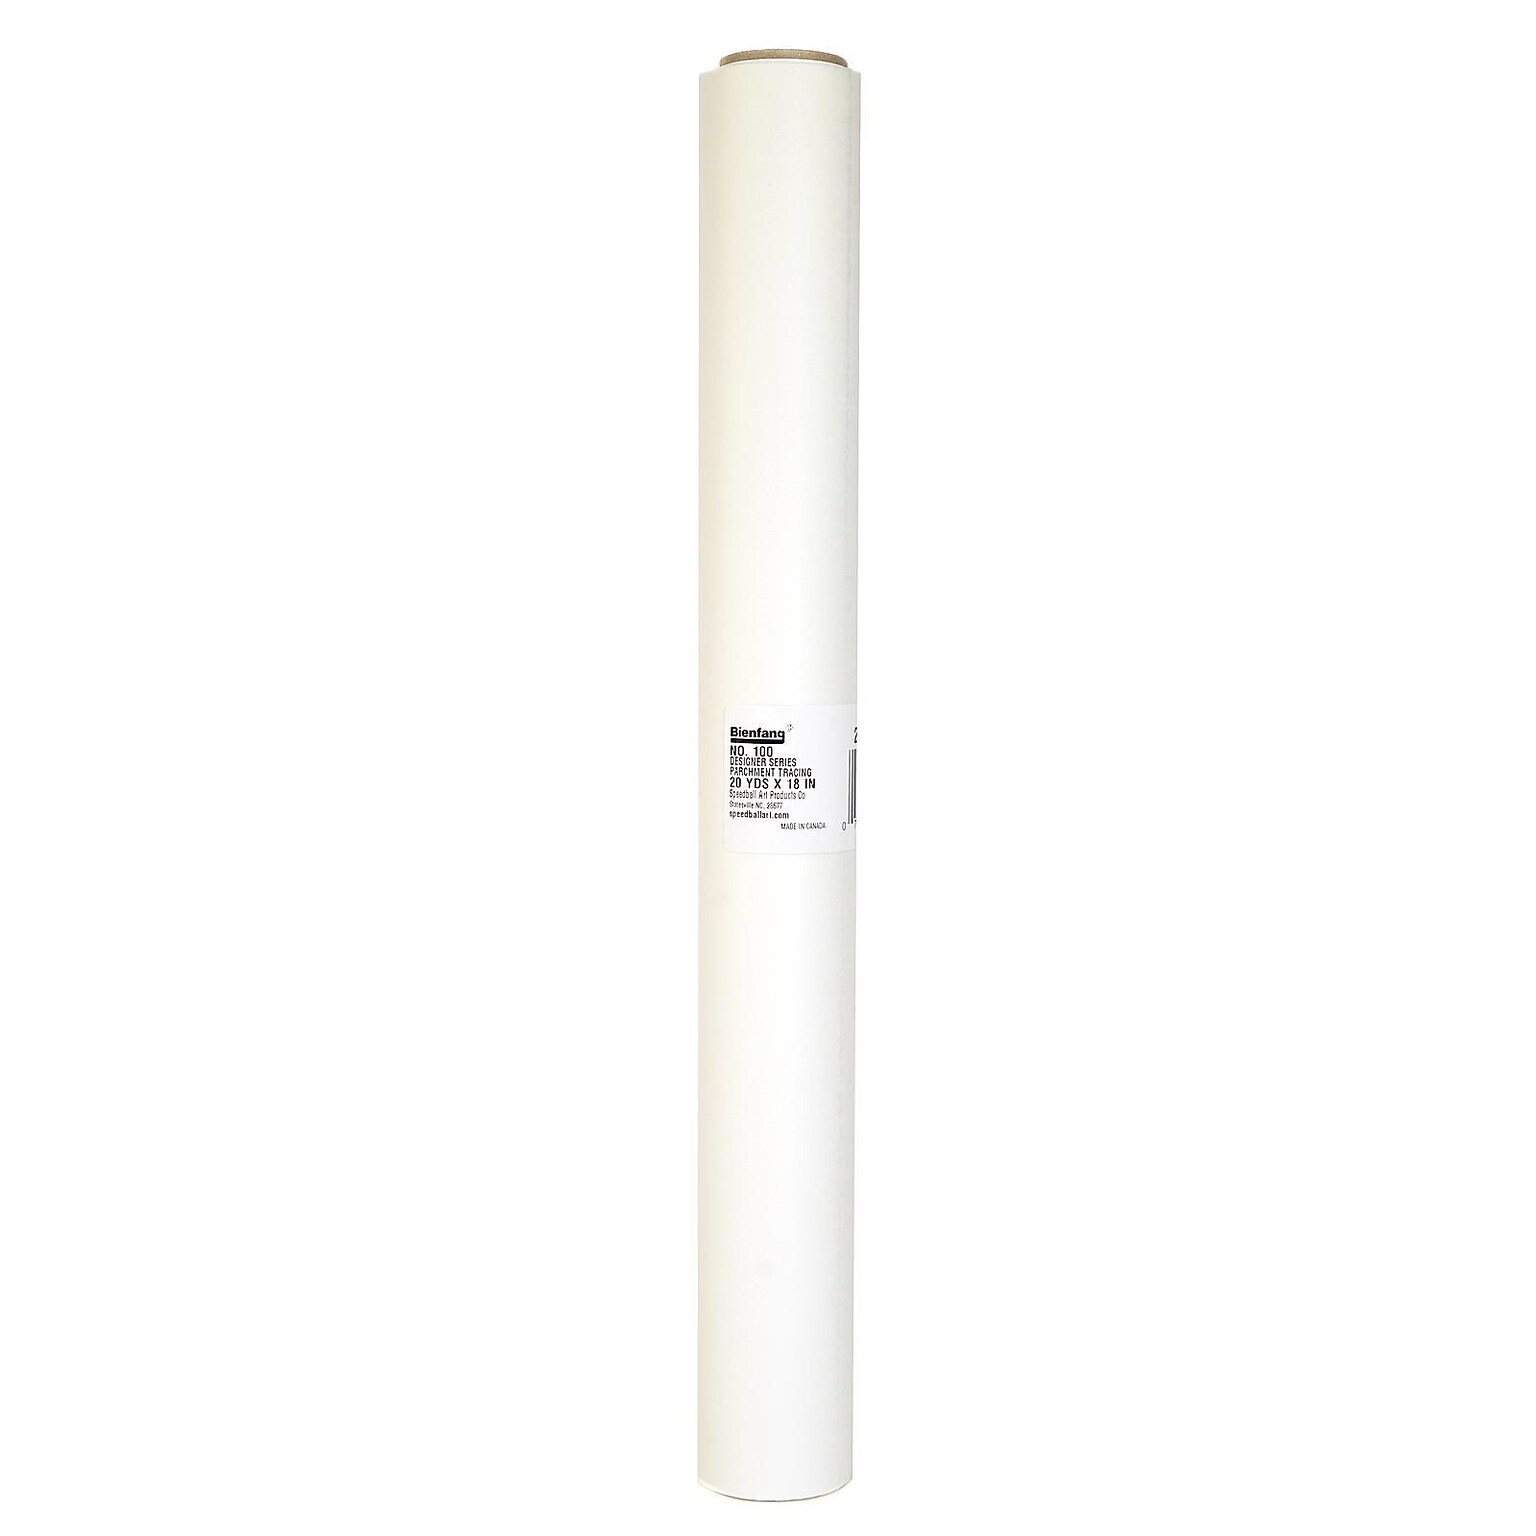 Bienfang Parchment 100 Tracing Paper 18 In. X 20 Yd. Roll (240321)